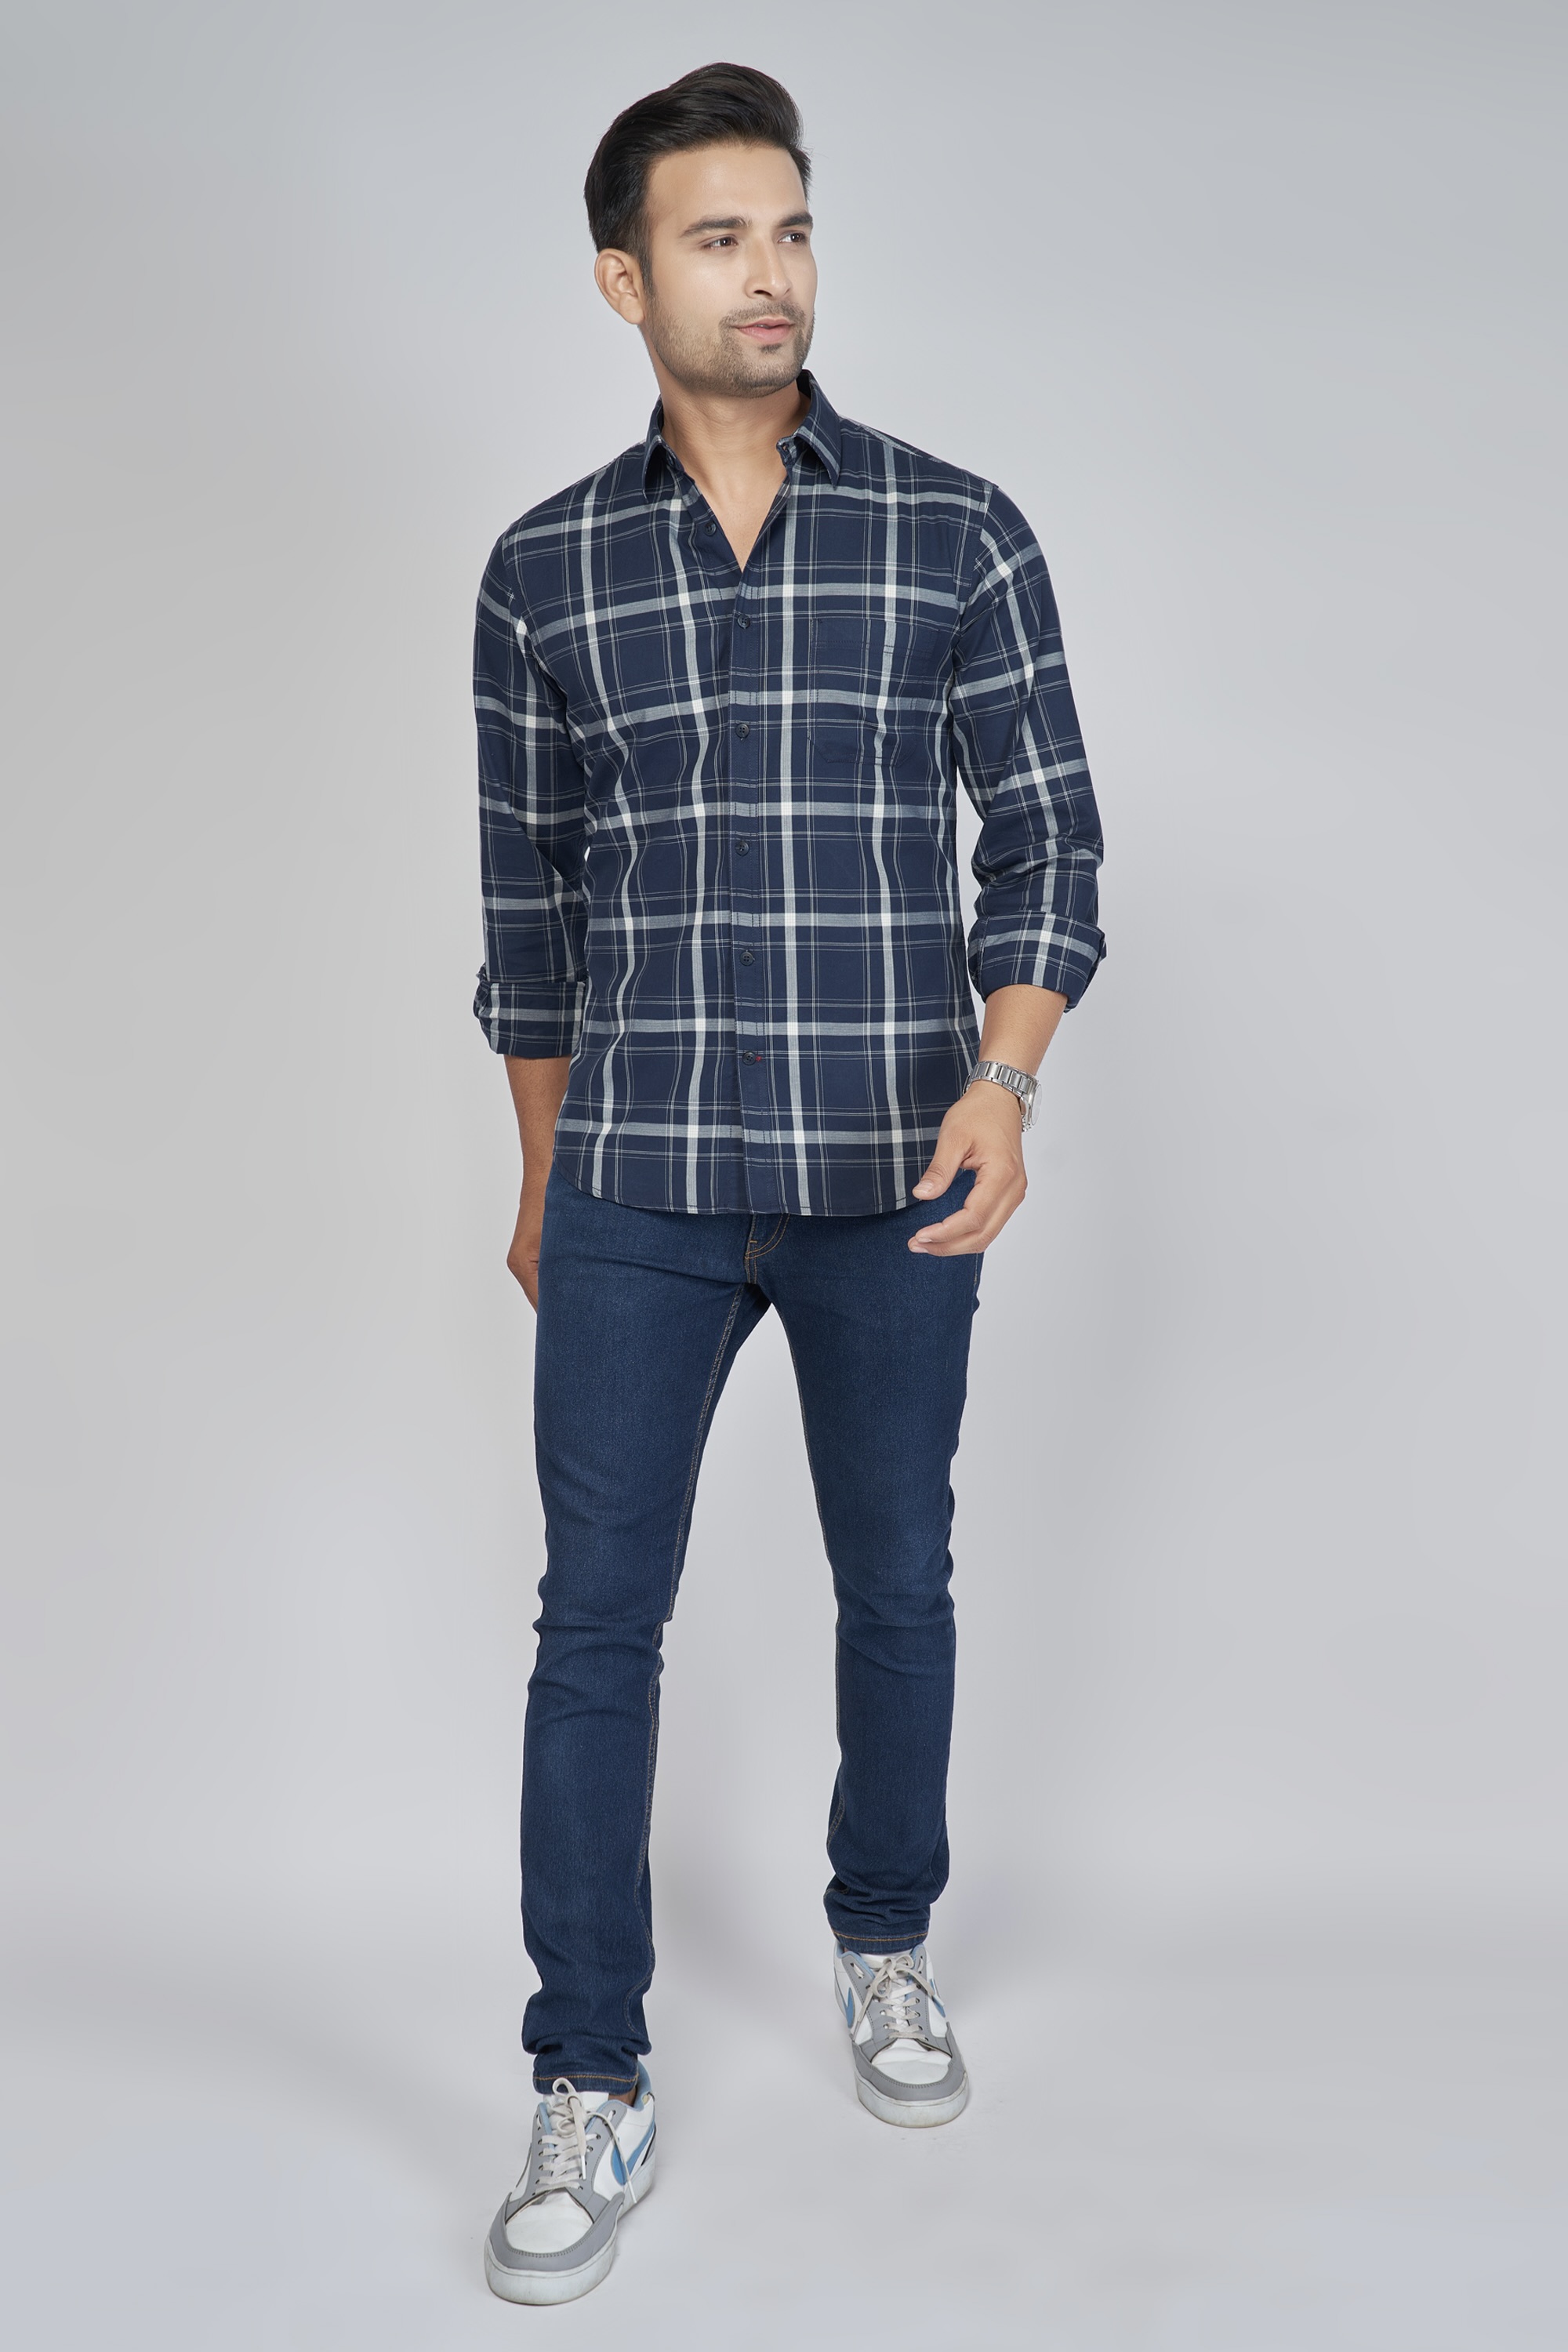 Blue and White Flannel Shirt